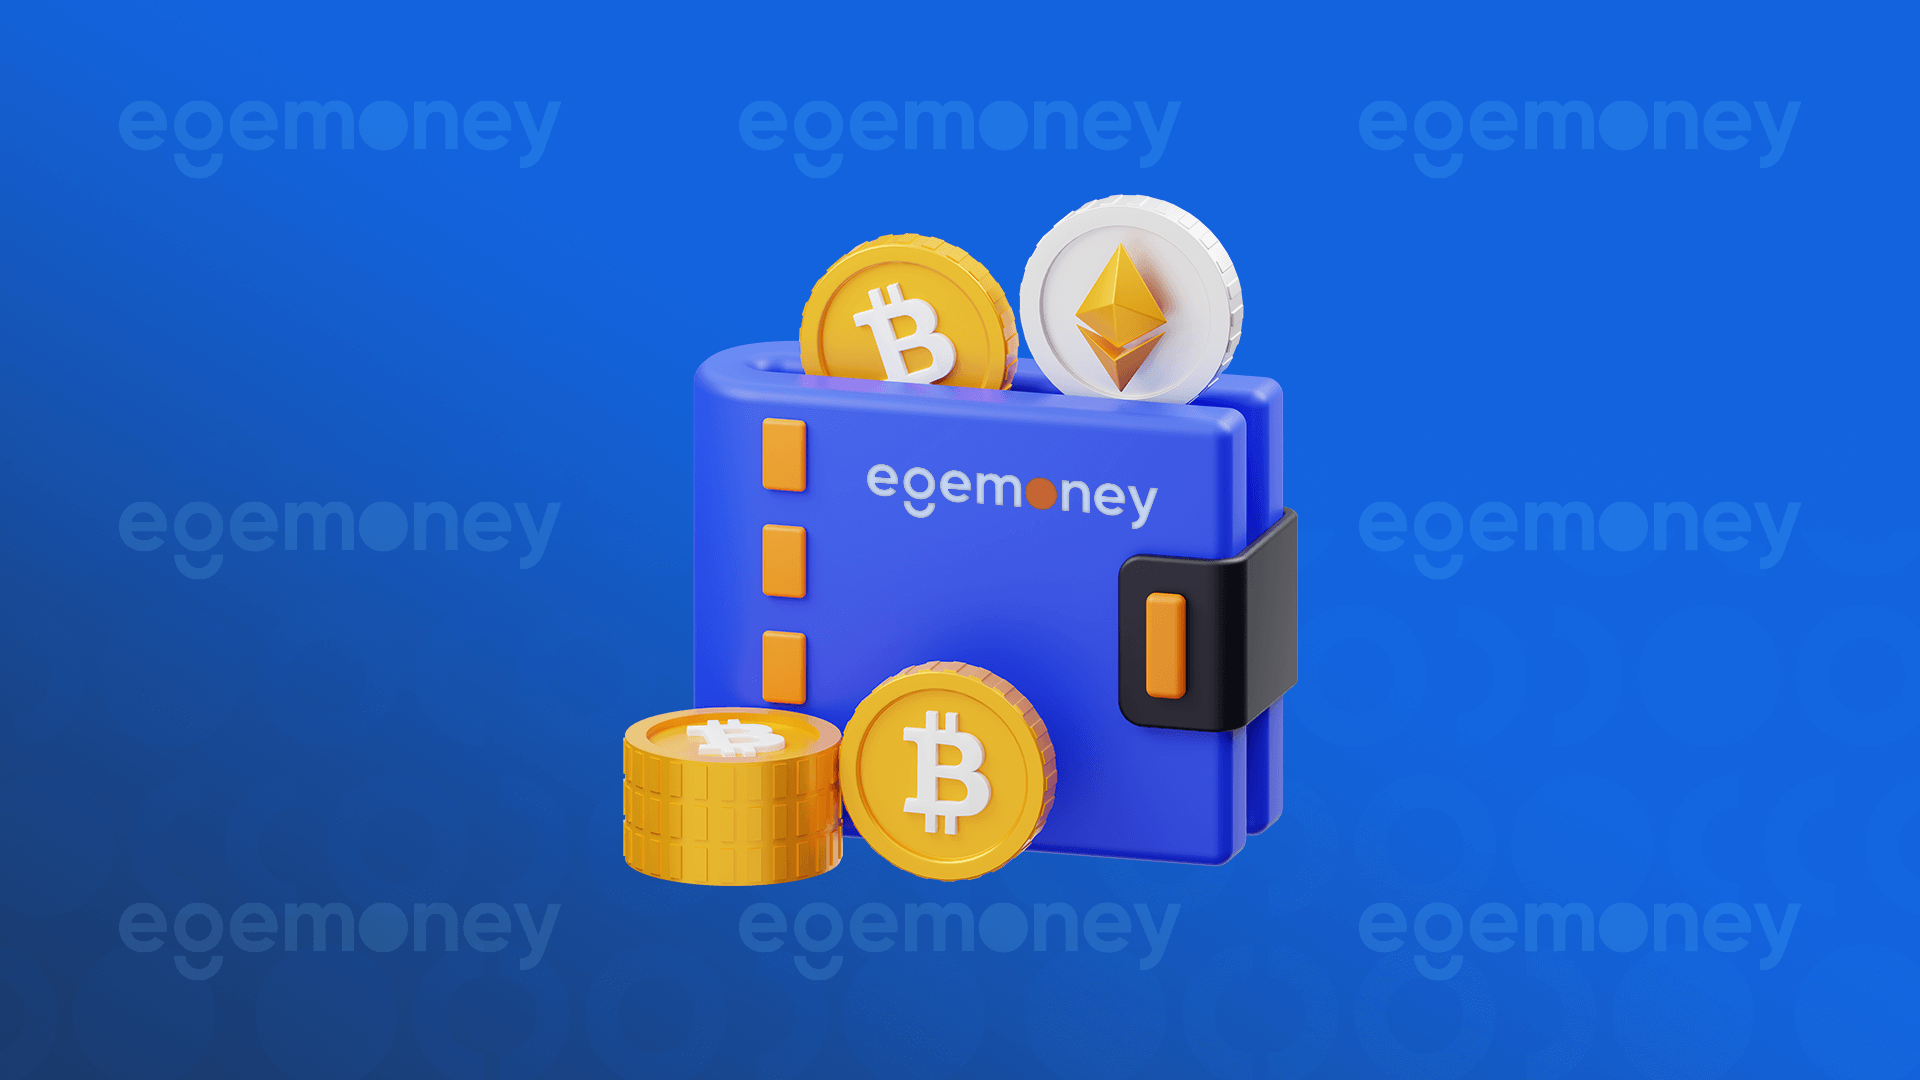 How To Find Our Egemoney Wallets?